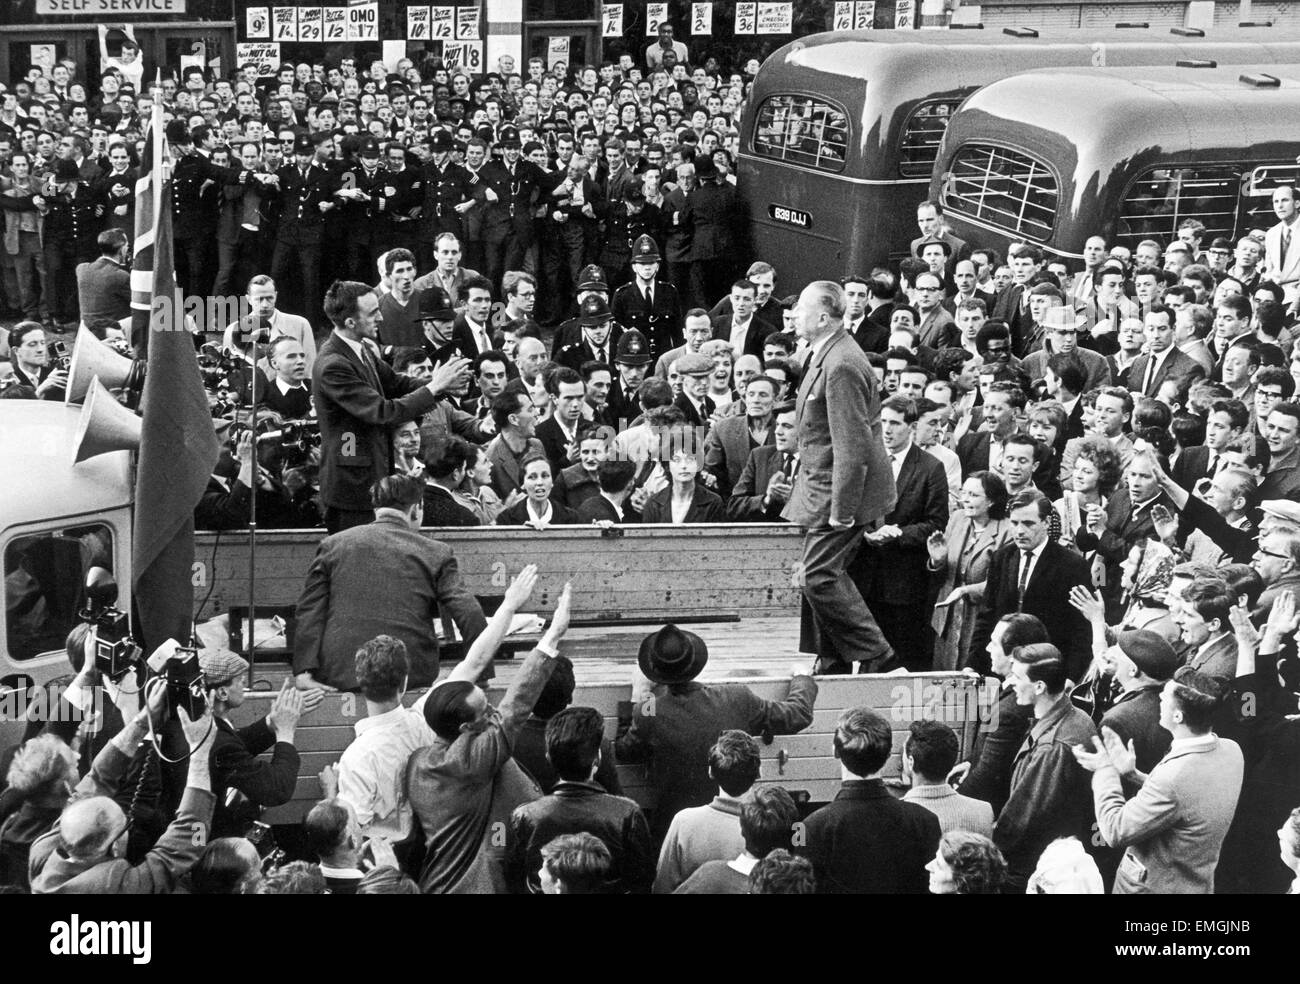 Sir Oswald Mosley prepares for his address by climbing on to the back of a lorry. He was met by a hail of missiles including rotten fruit, pennies and stones as people tried to storm the platform. His speech was drowned out by continuous chorus of 'down with the fascists'. 2nd August 1962 Stock Photo